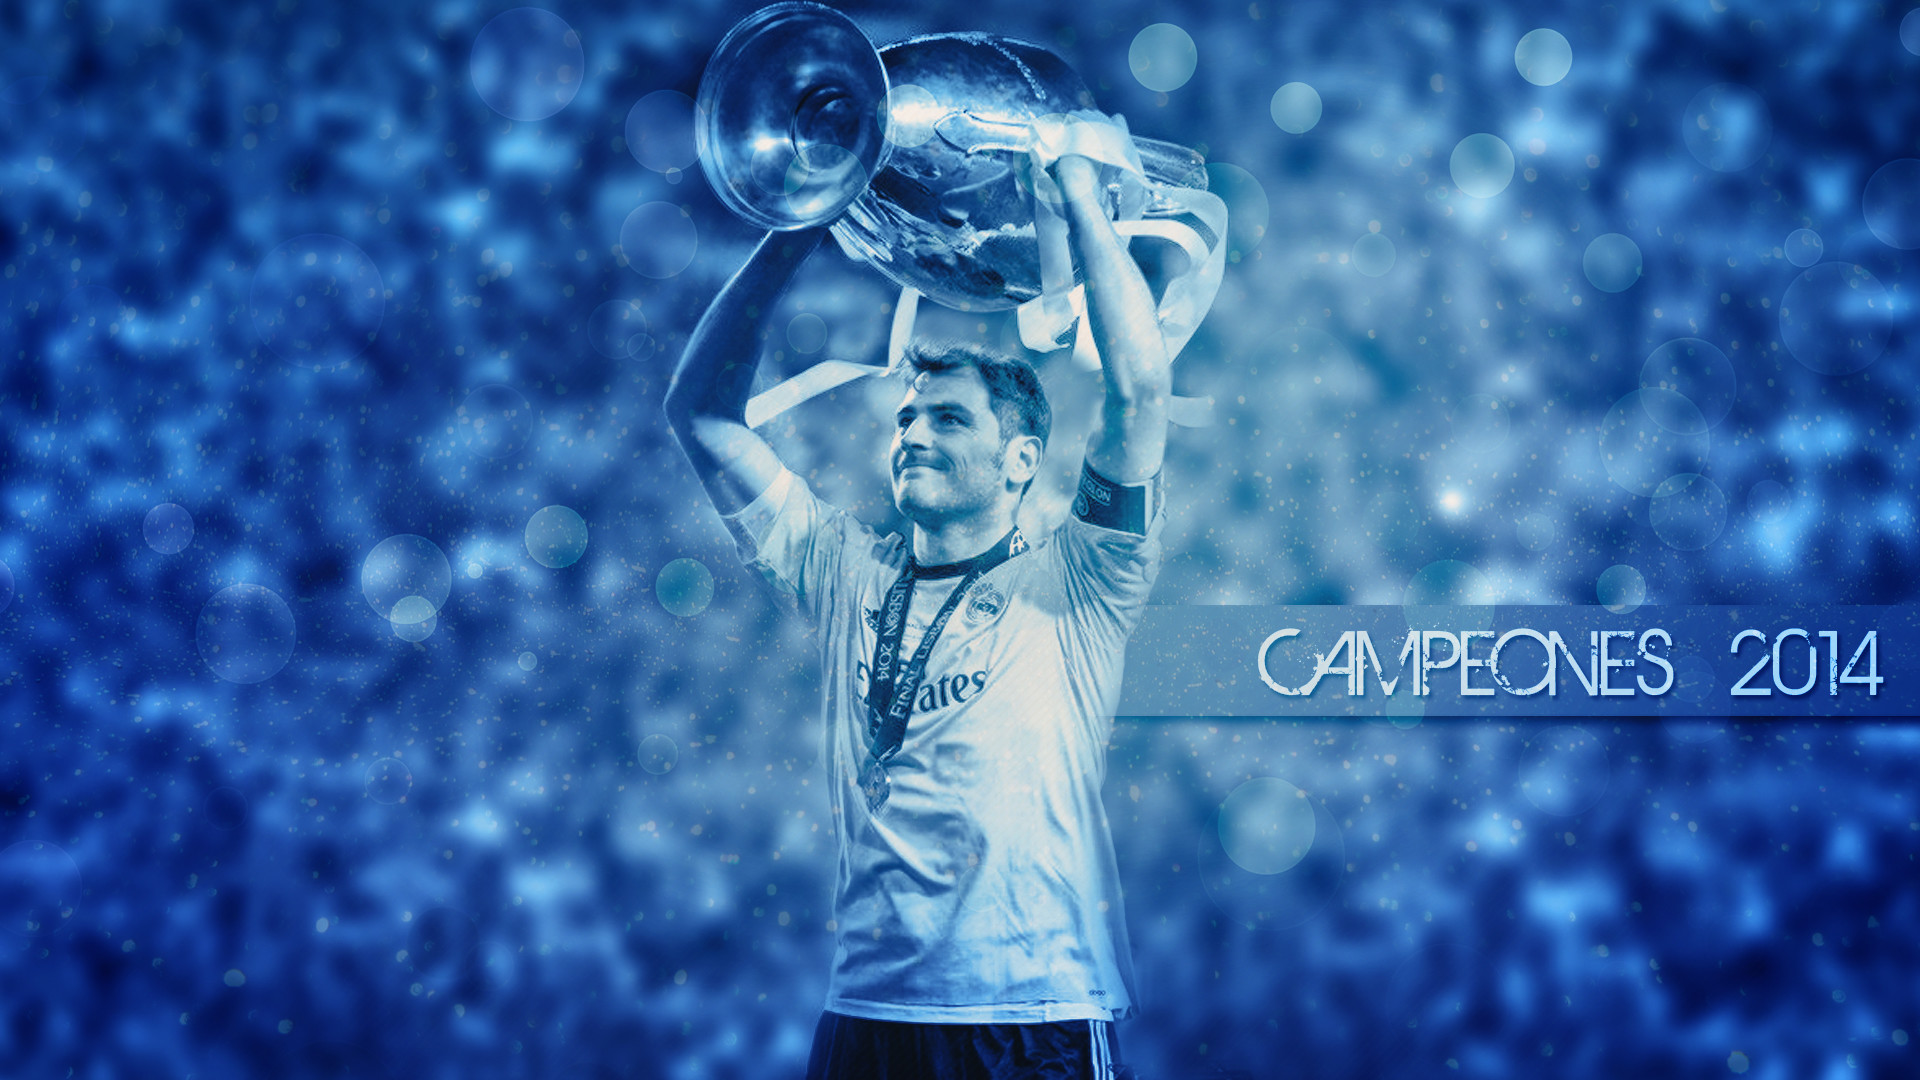 1920x1080 ... Real Madrid Champions of UEFA Champions League by Kerimov23